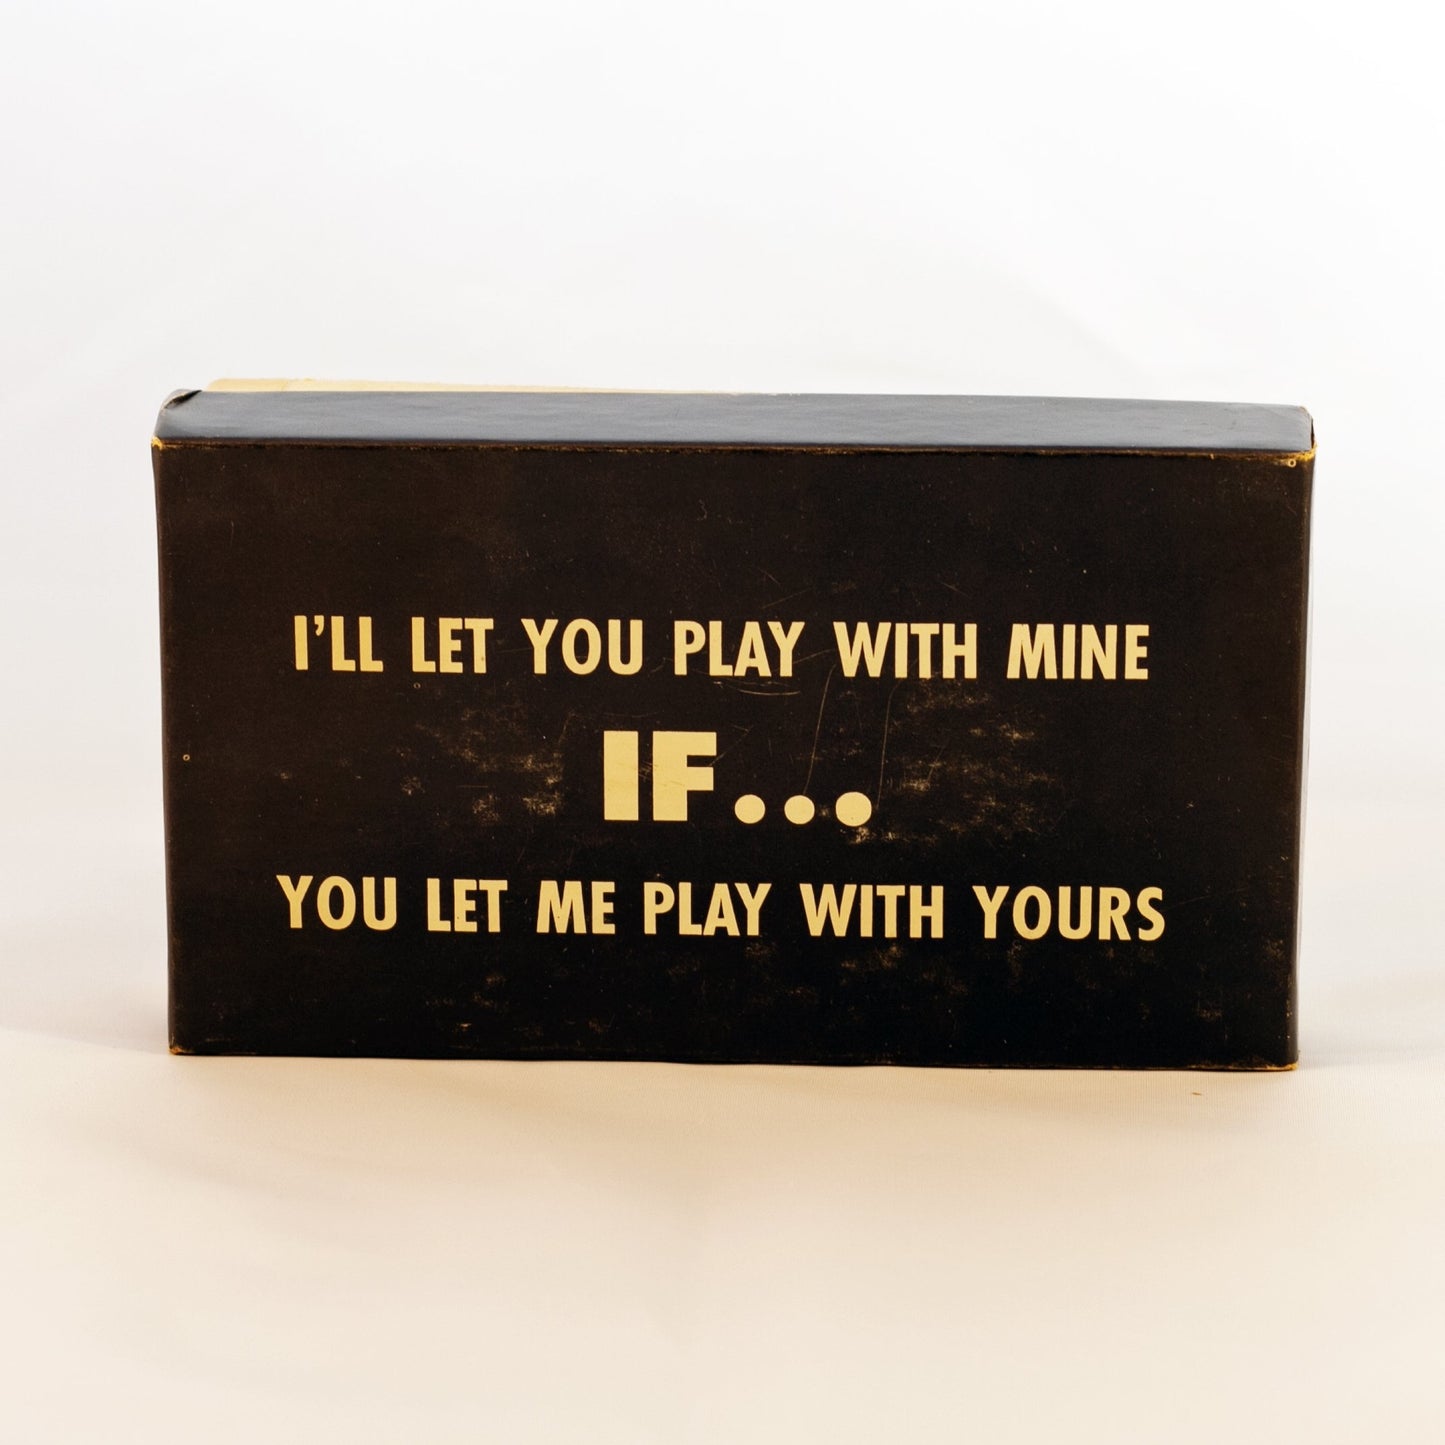 Golden's "I'LL LET YOU PLAY WITH MINE, IF YOU LET ME PLAY WITH YOURS..." Risqué Gag Gift 